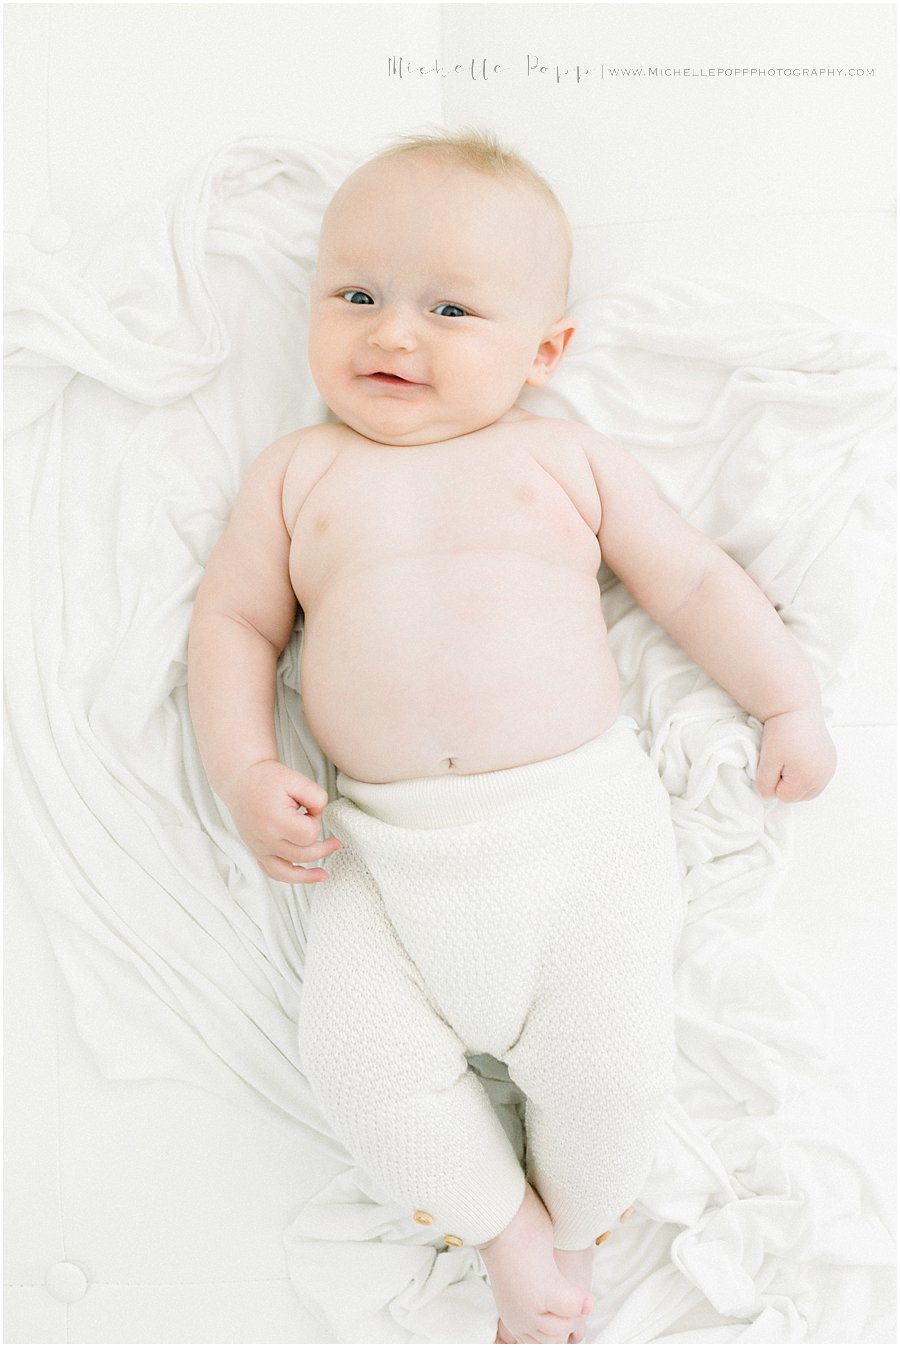 smiling baby boy lying on sheets during baby photography session